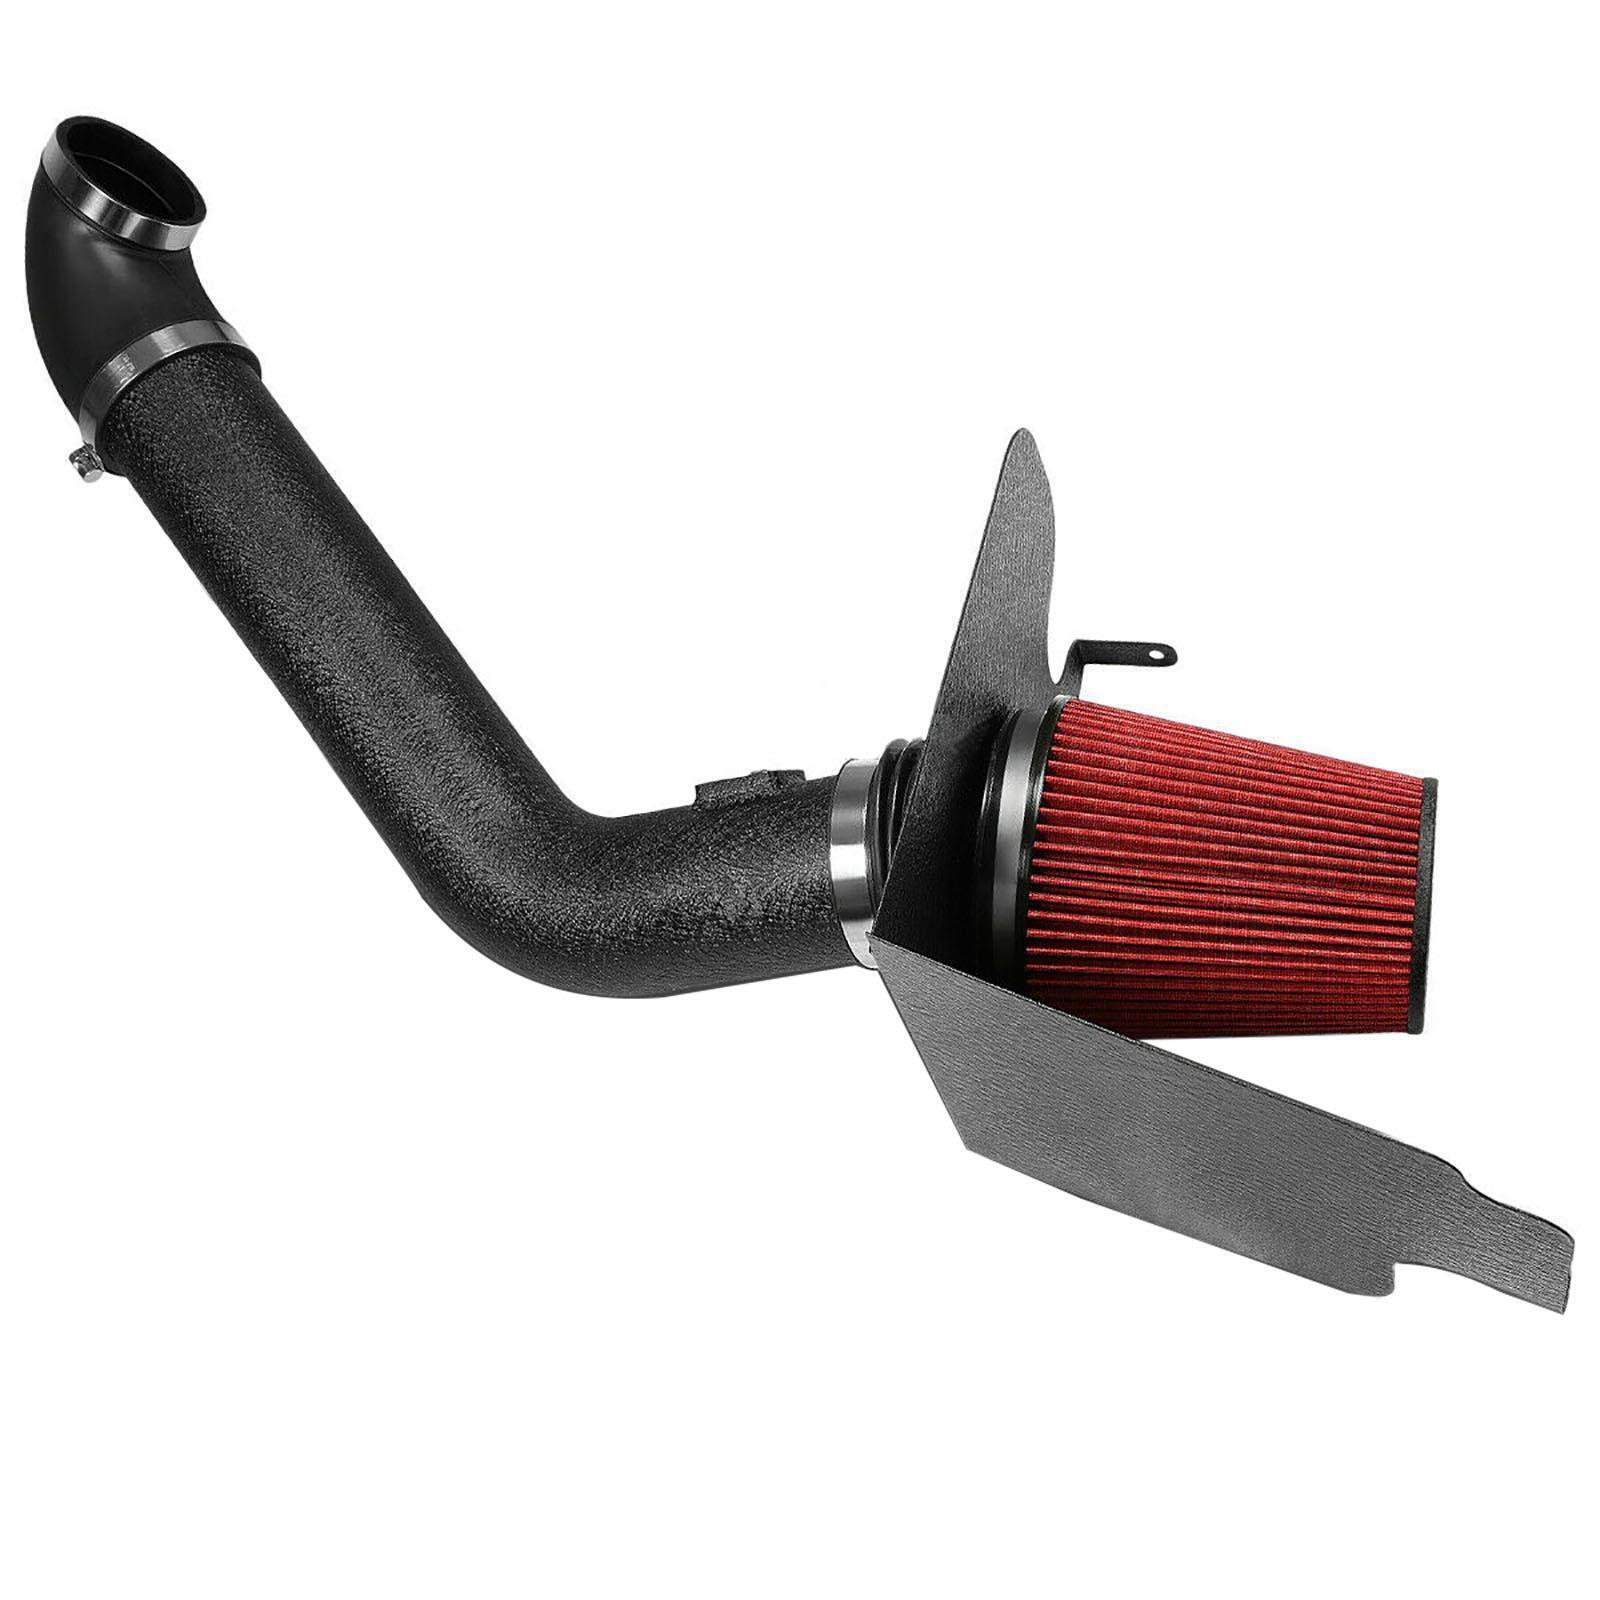 Cold Air Intake Induction Kit + Heat Shield For 04-08 Ford F150 5.4L V8